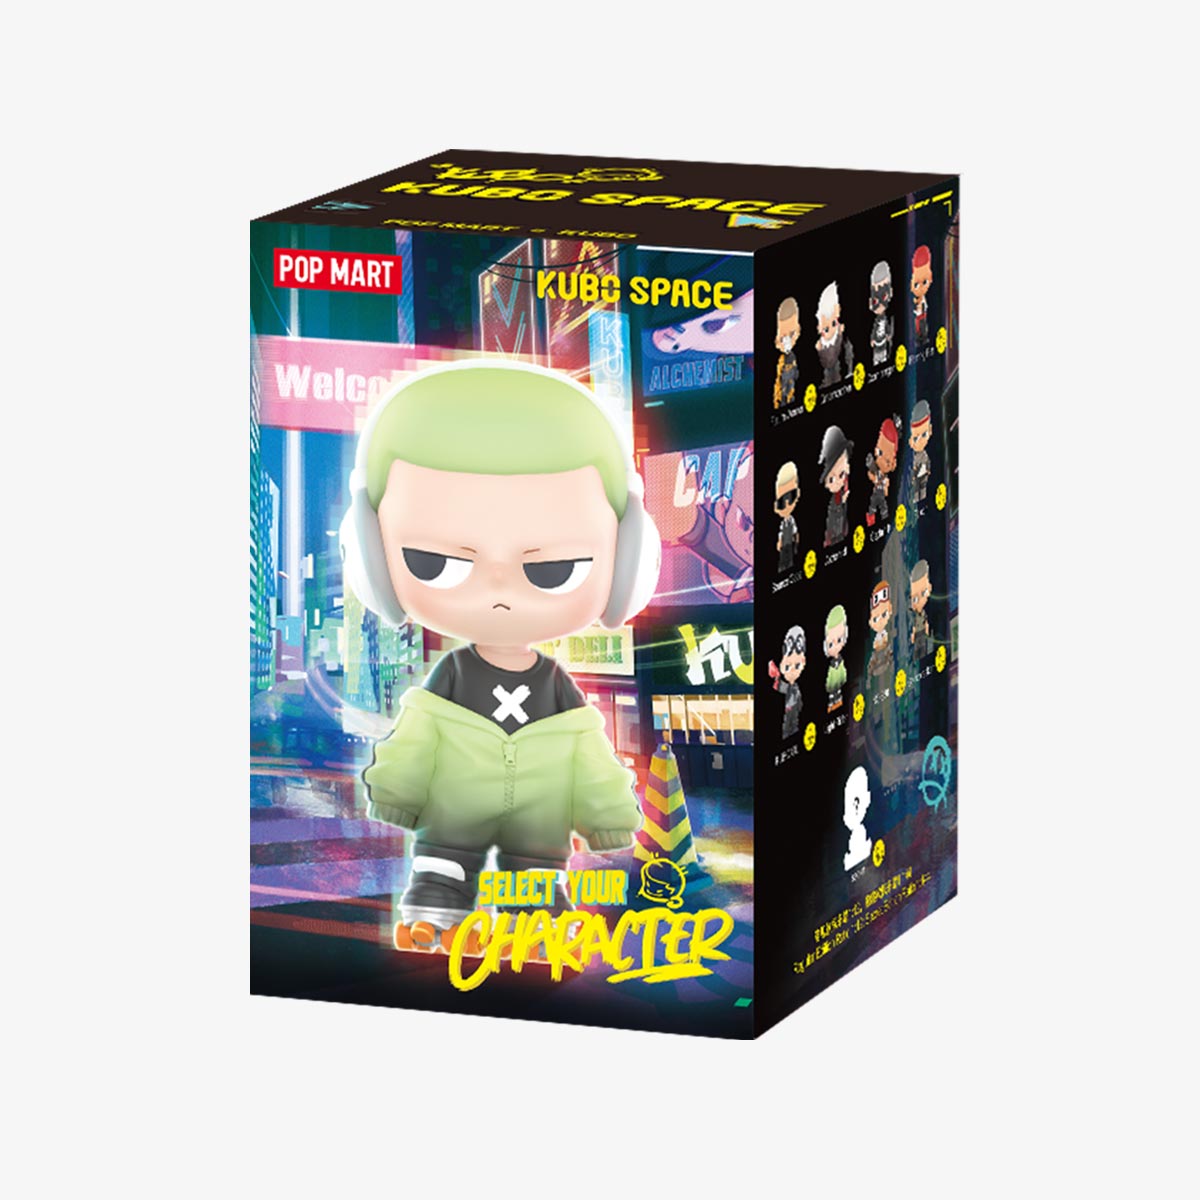 POP MART Kubo Select Your Character Series-Single Box (Random)-Pop Mart-Ace Cards &amp; Collectibles